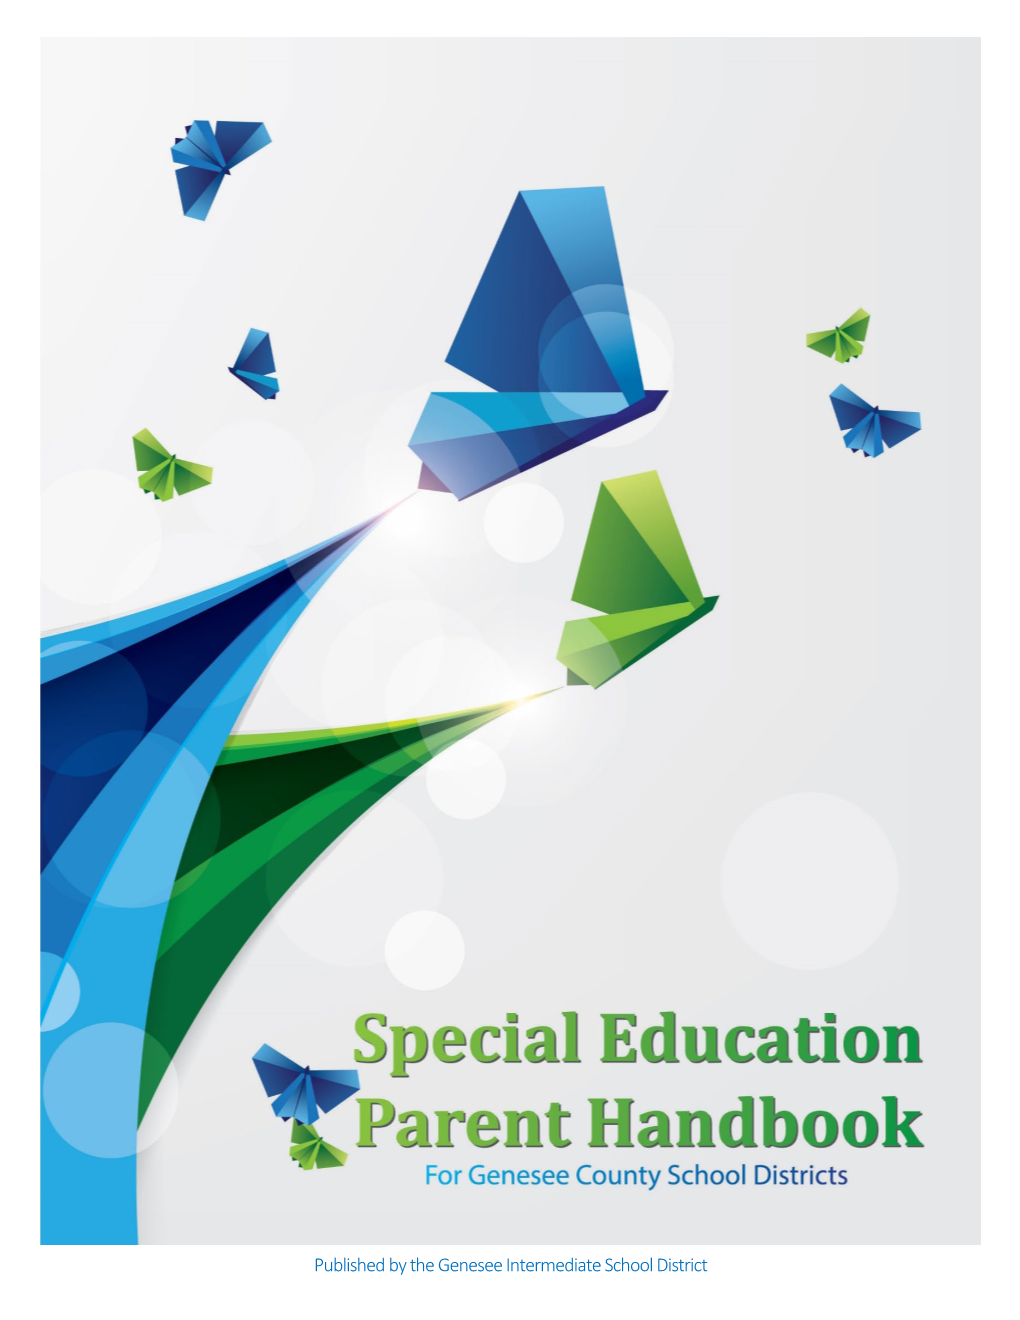 Special Education Parent Handbook for Genesee County School Districts Published by the Genesee Intermediate School District